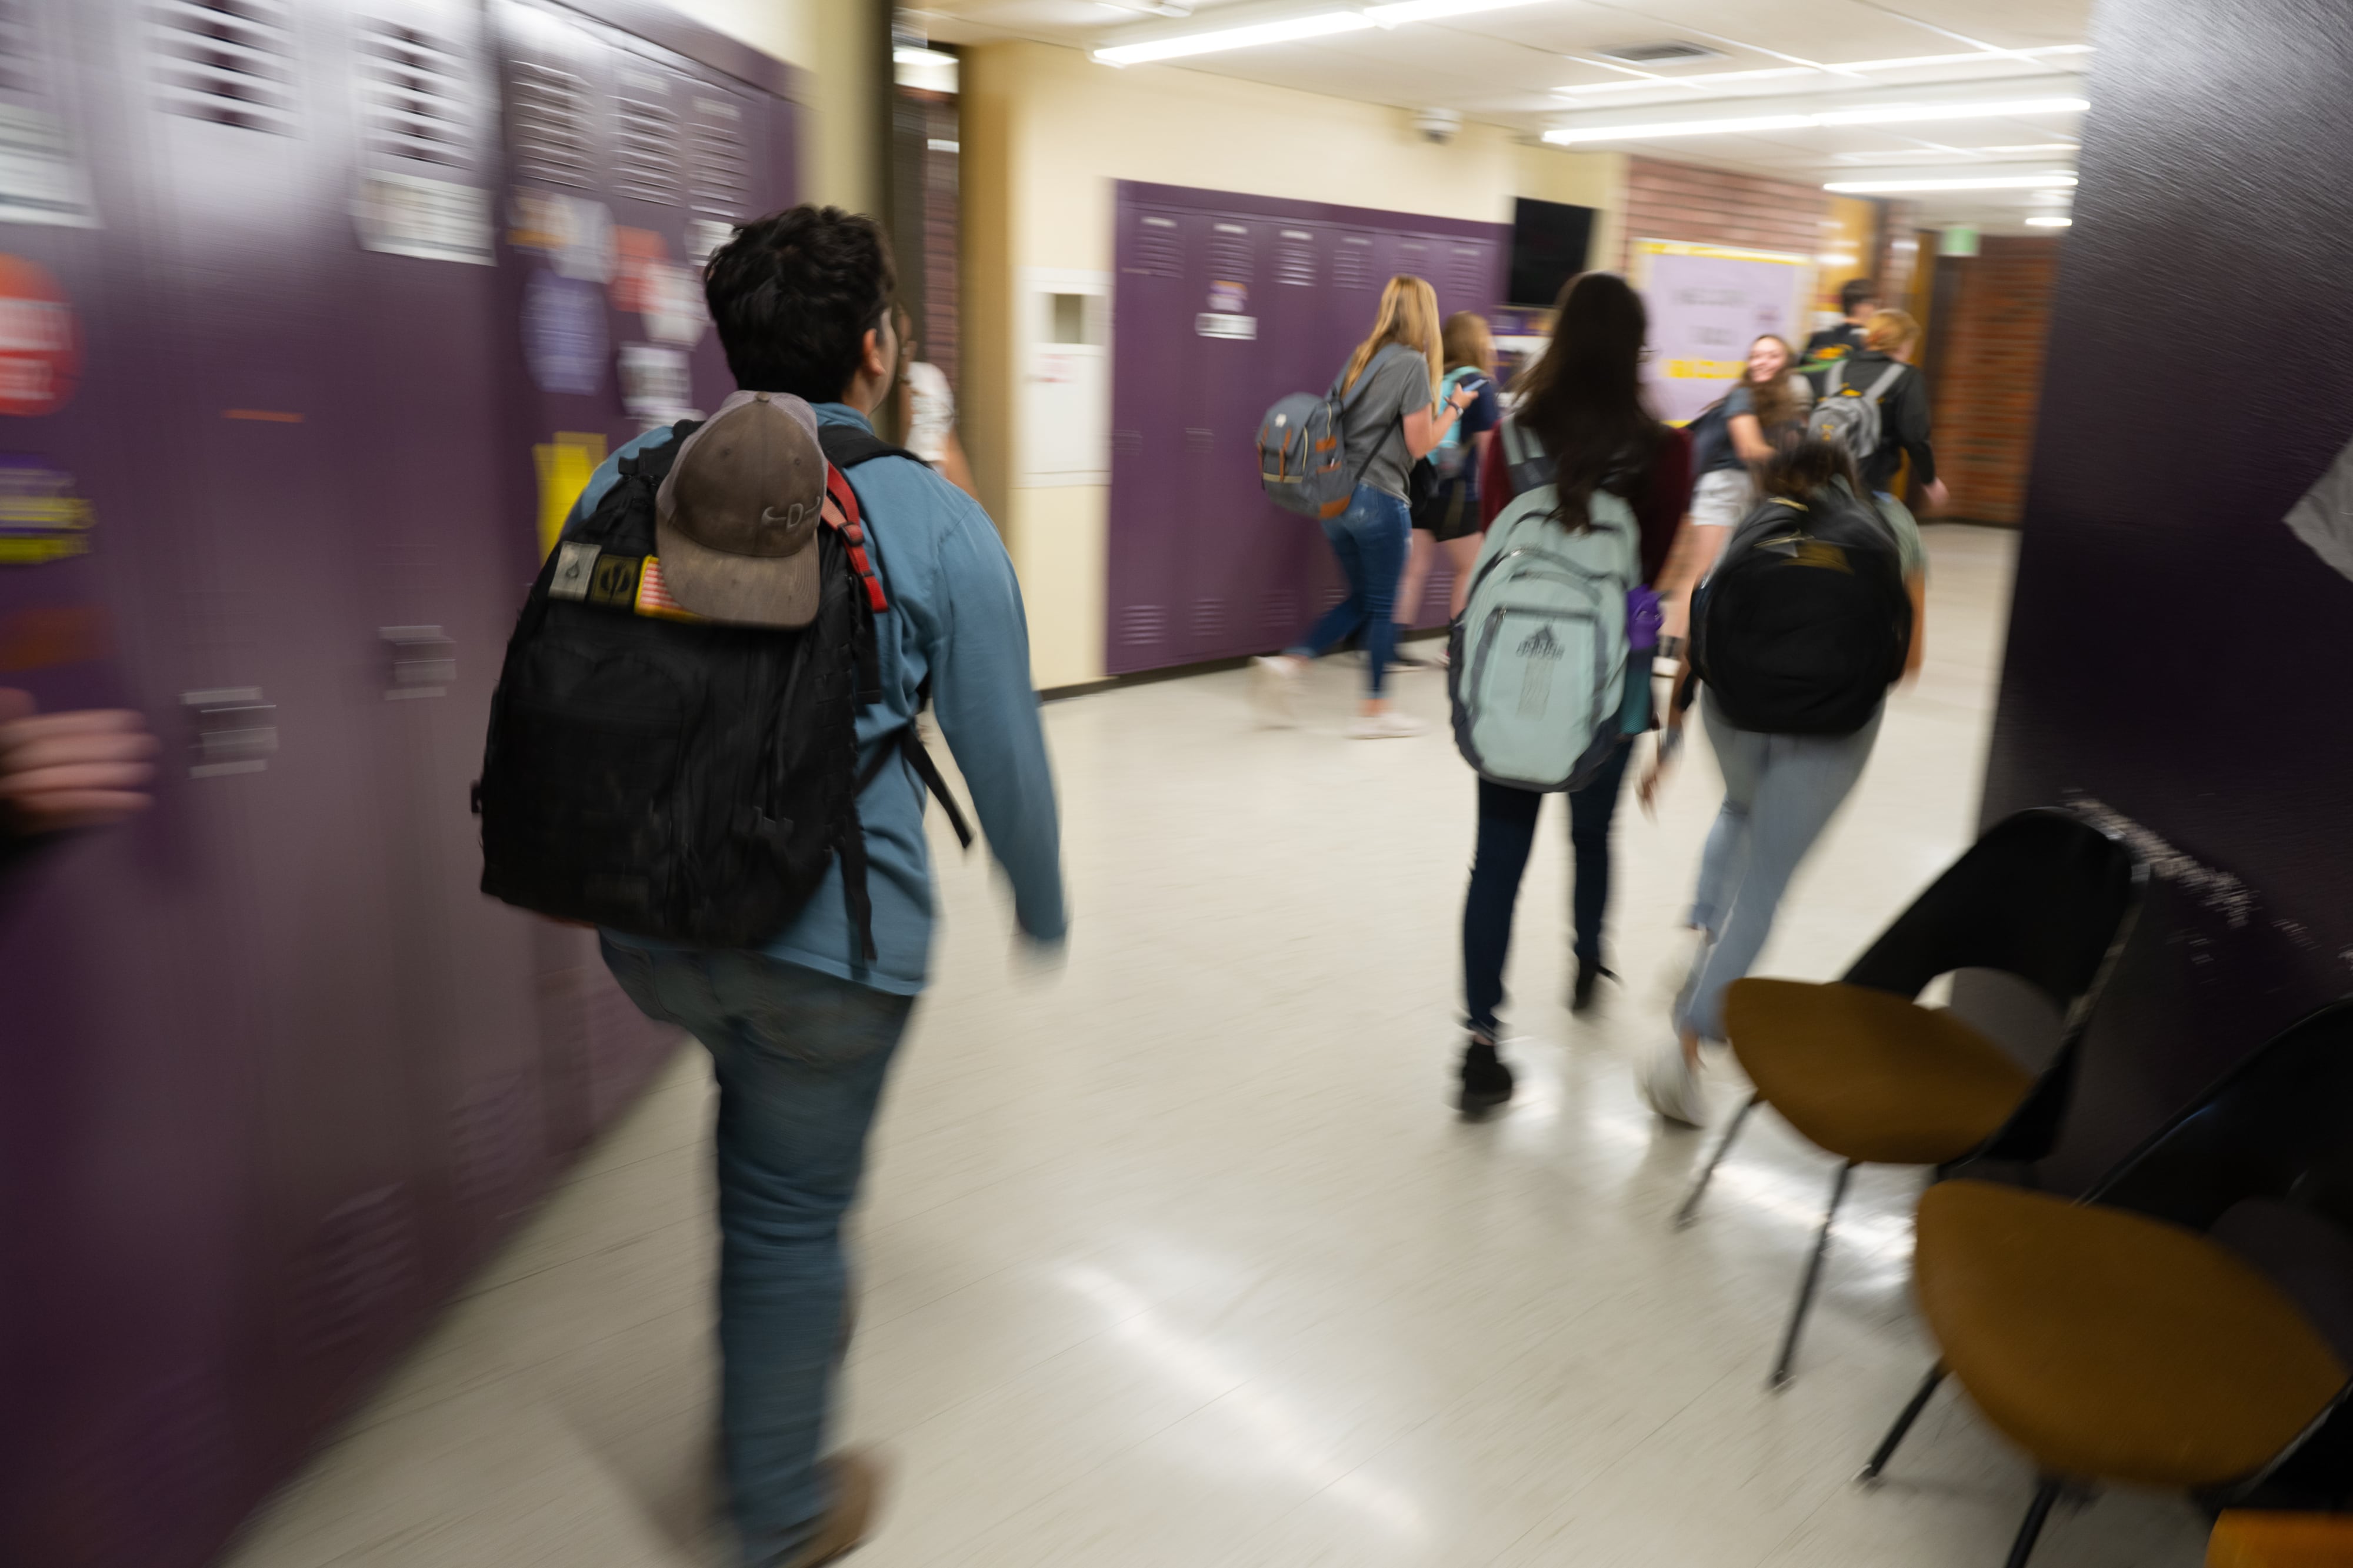 A boy wearing a backpack walks down a school hallway with purple lockers, while a group of students walks ahead of him.